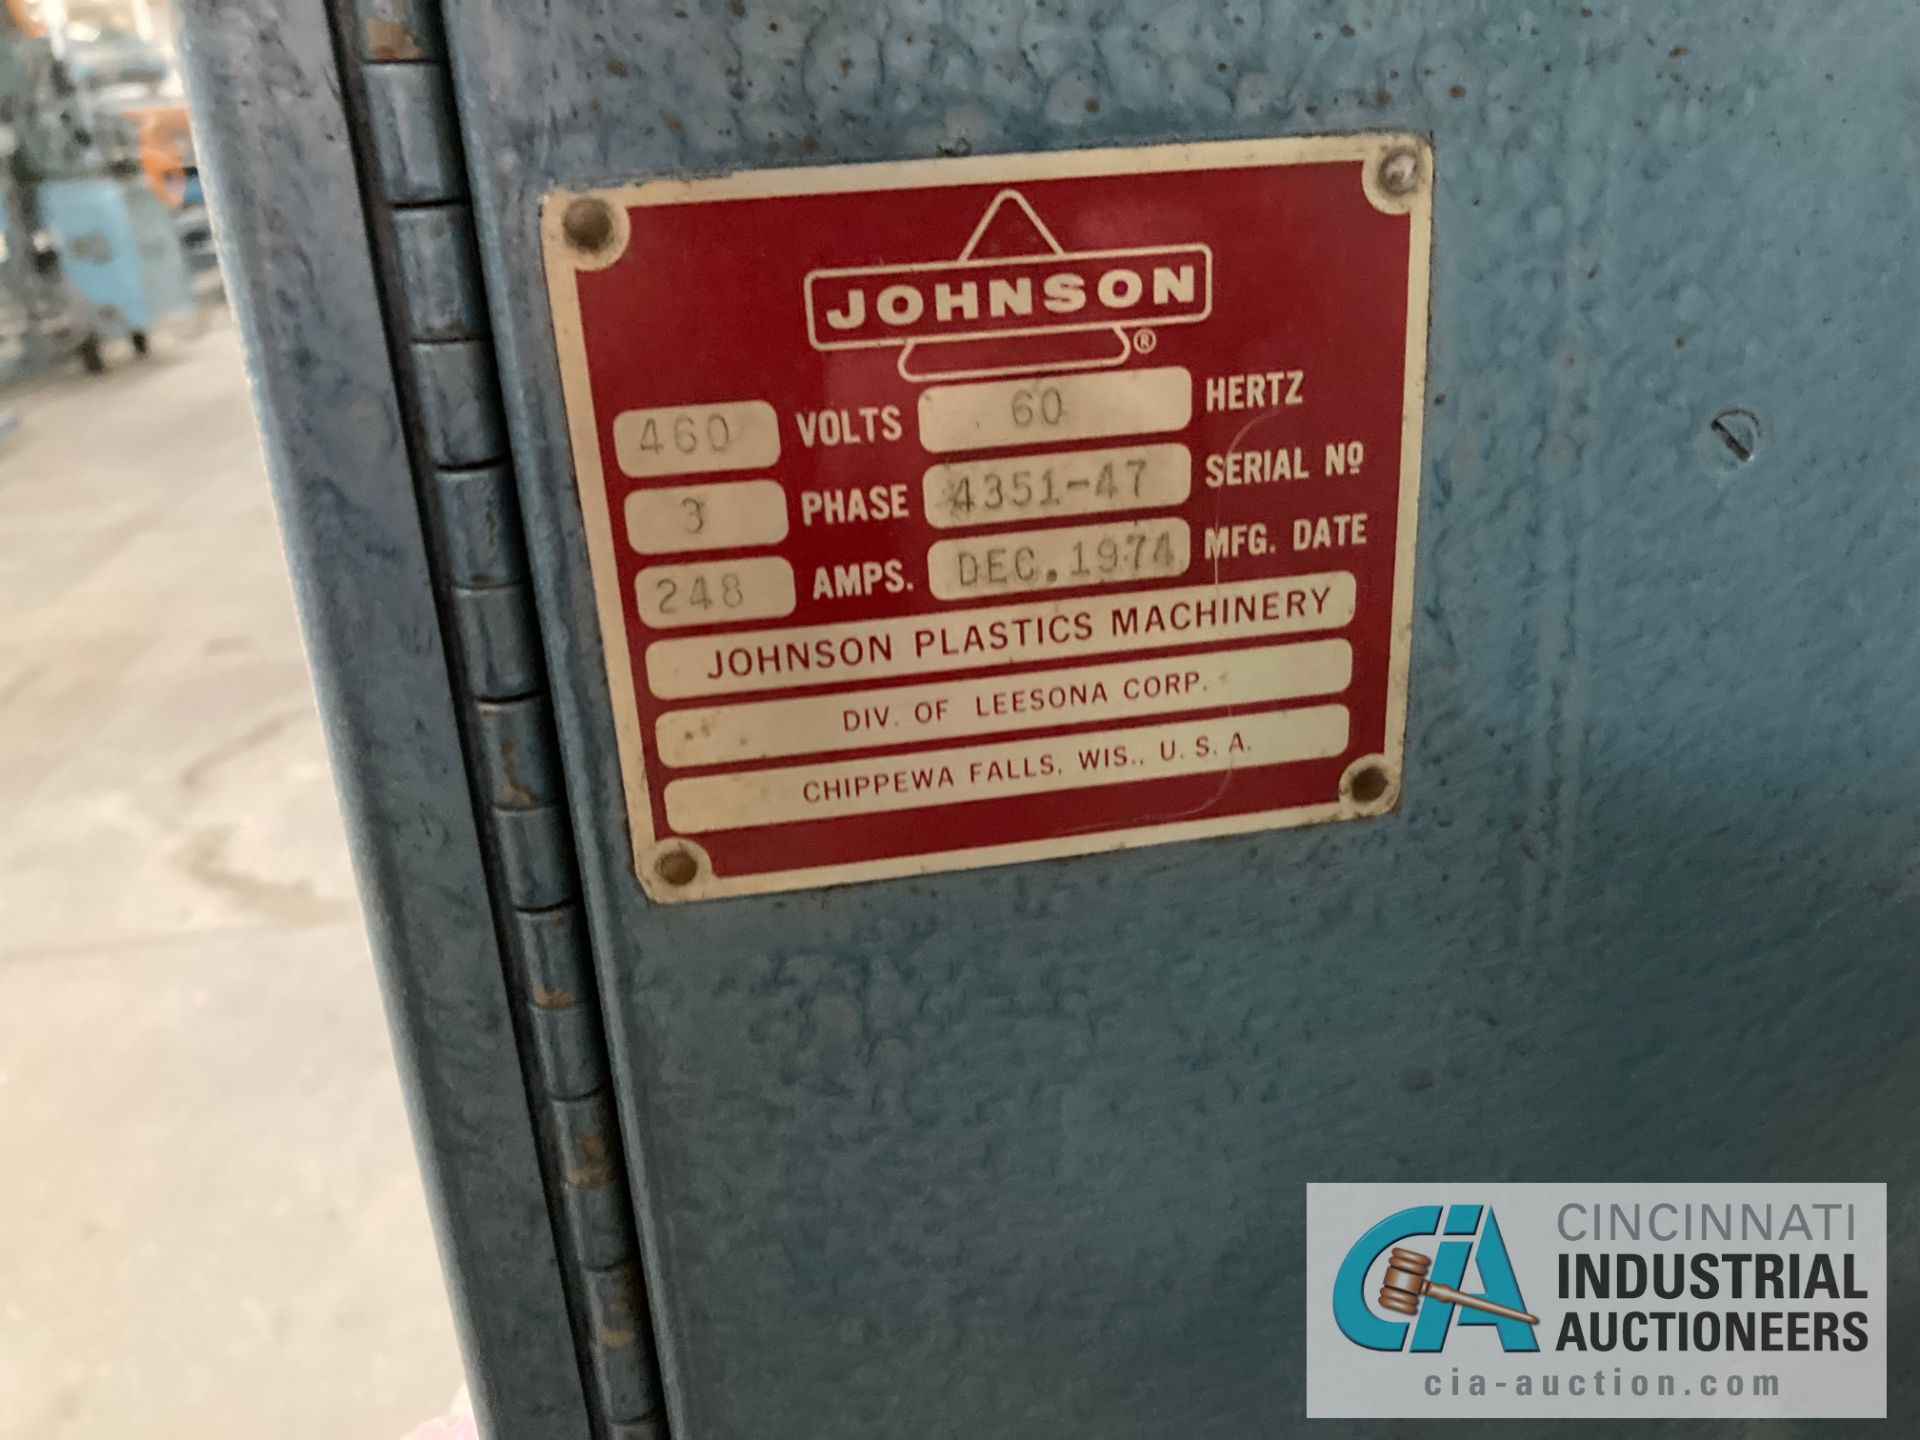 ****3.5" JOHNSON EXTRUDER; S/N 4353-47, 24.1 L/D VENTED BARREL, 17.1 GEARBOX RATIO, 126 HP MOTOR, - Image 7 of 10